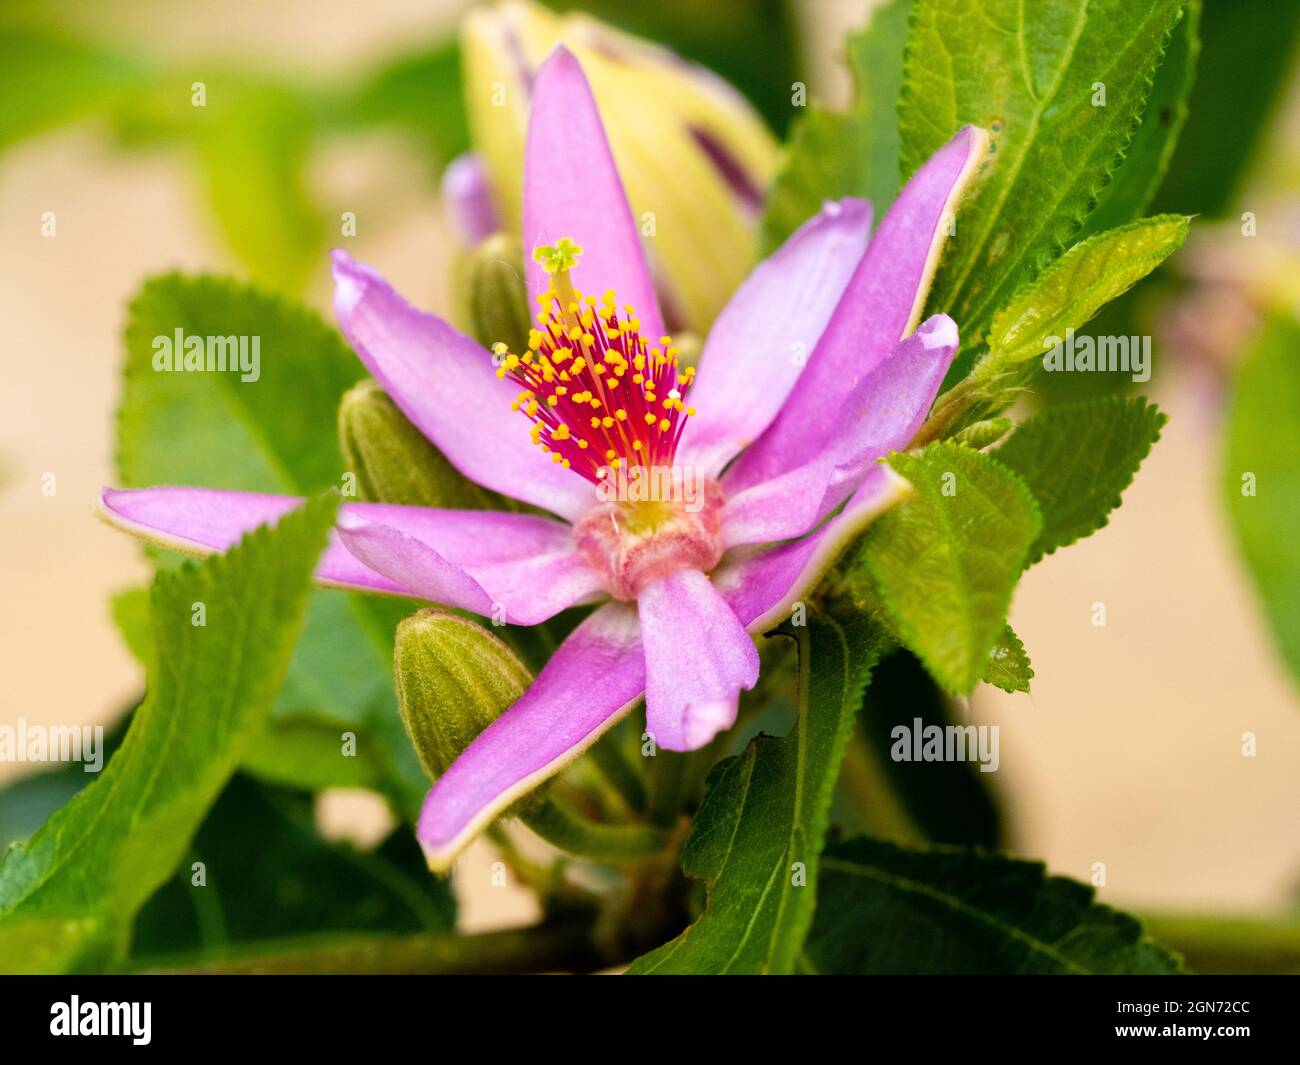 Prominent stamens of the tender, pink petalled evergreen, weakly climbing or shrubby African starbush, Grewia occidentalis Stock Photo